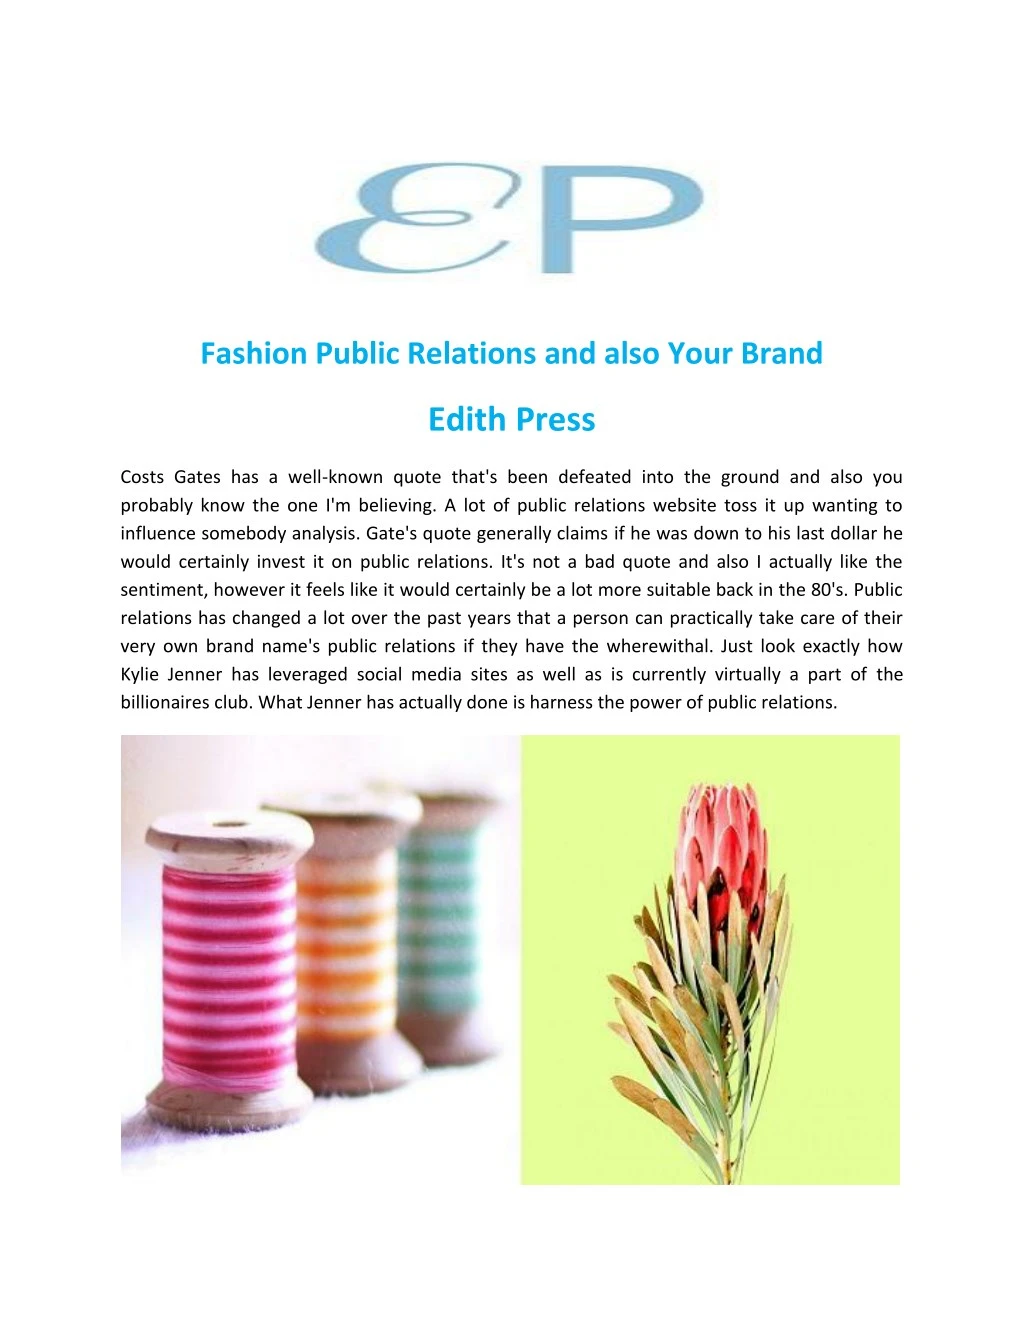 fashion public relations and also your brand